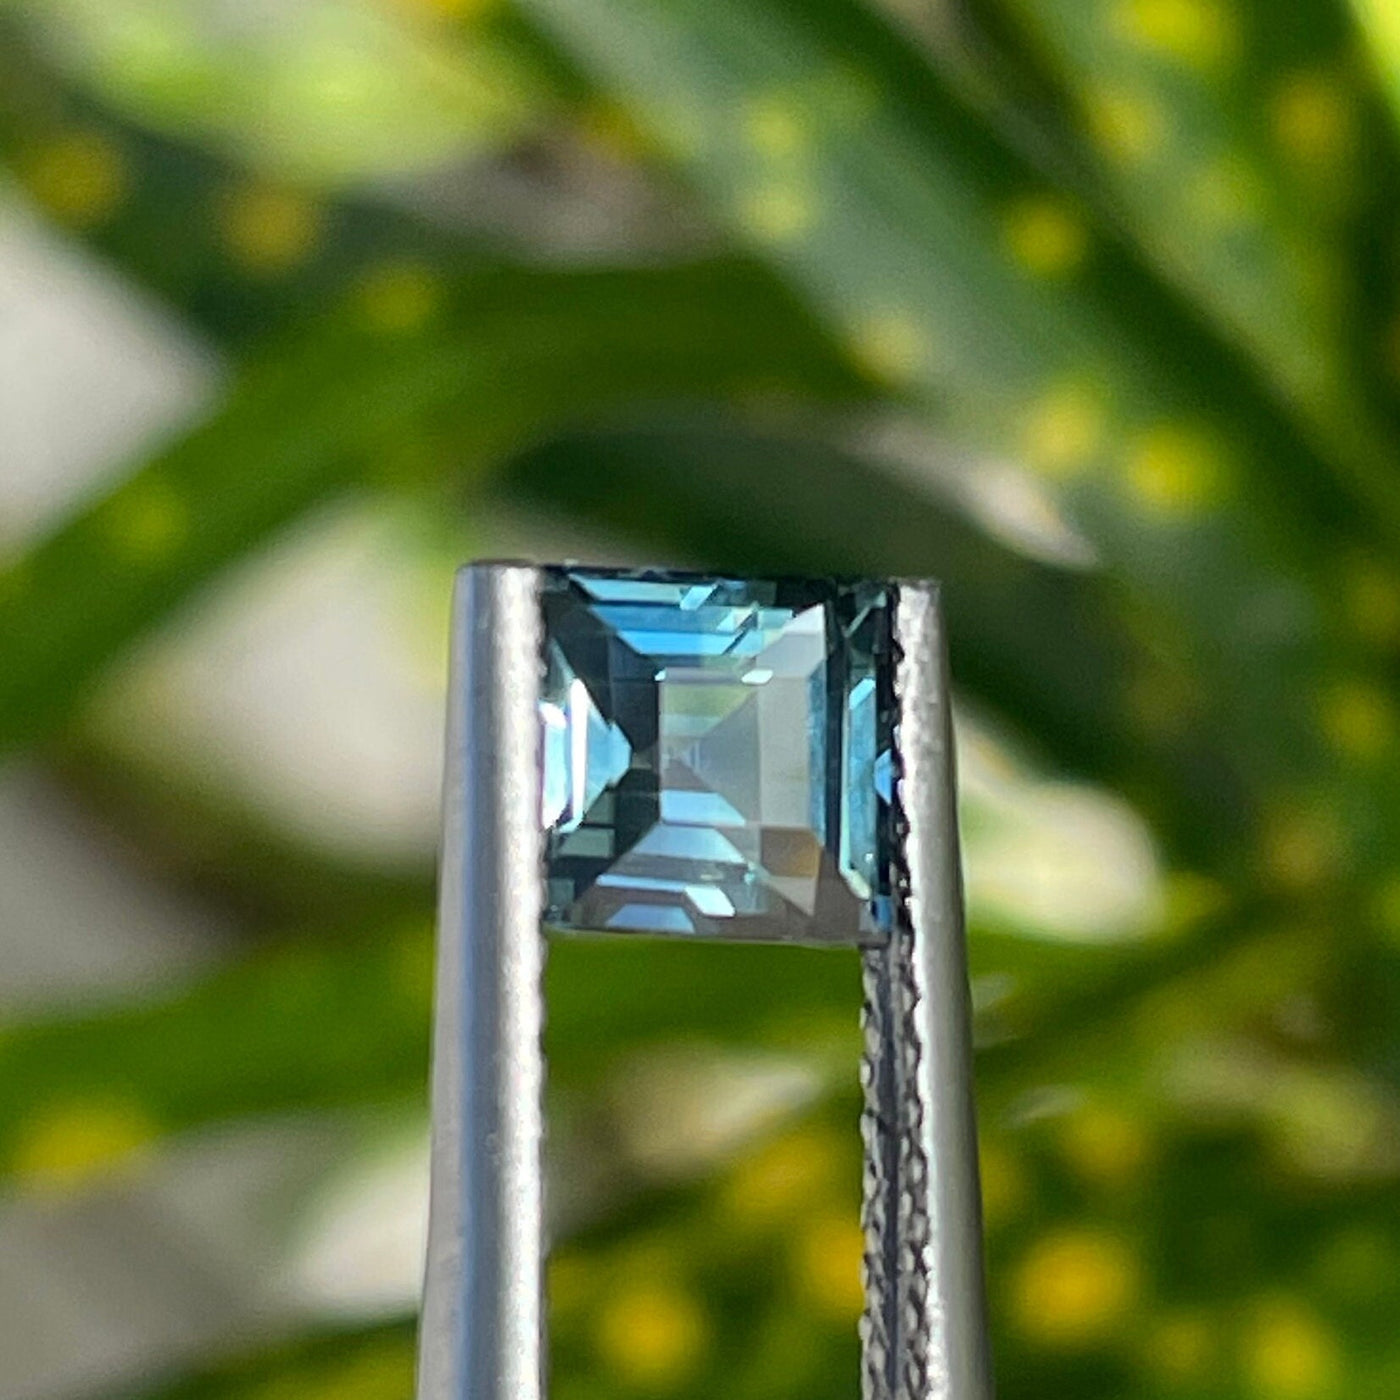 Teal Sapphire  1.18 Ct